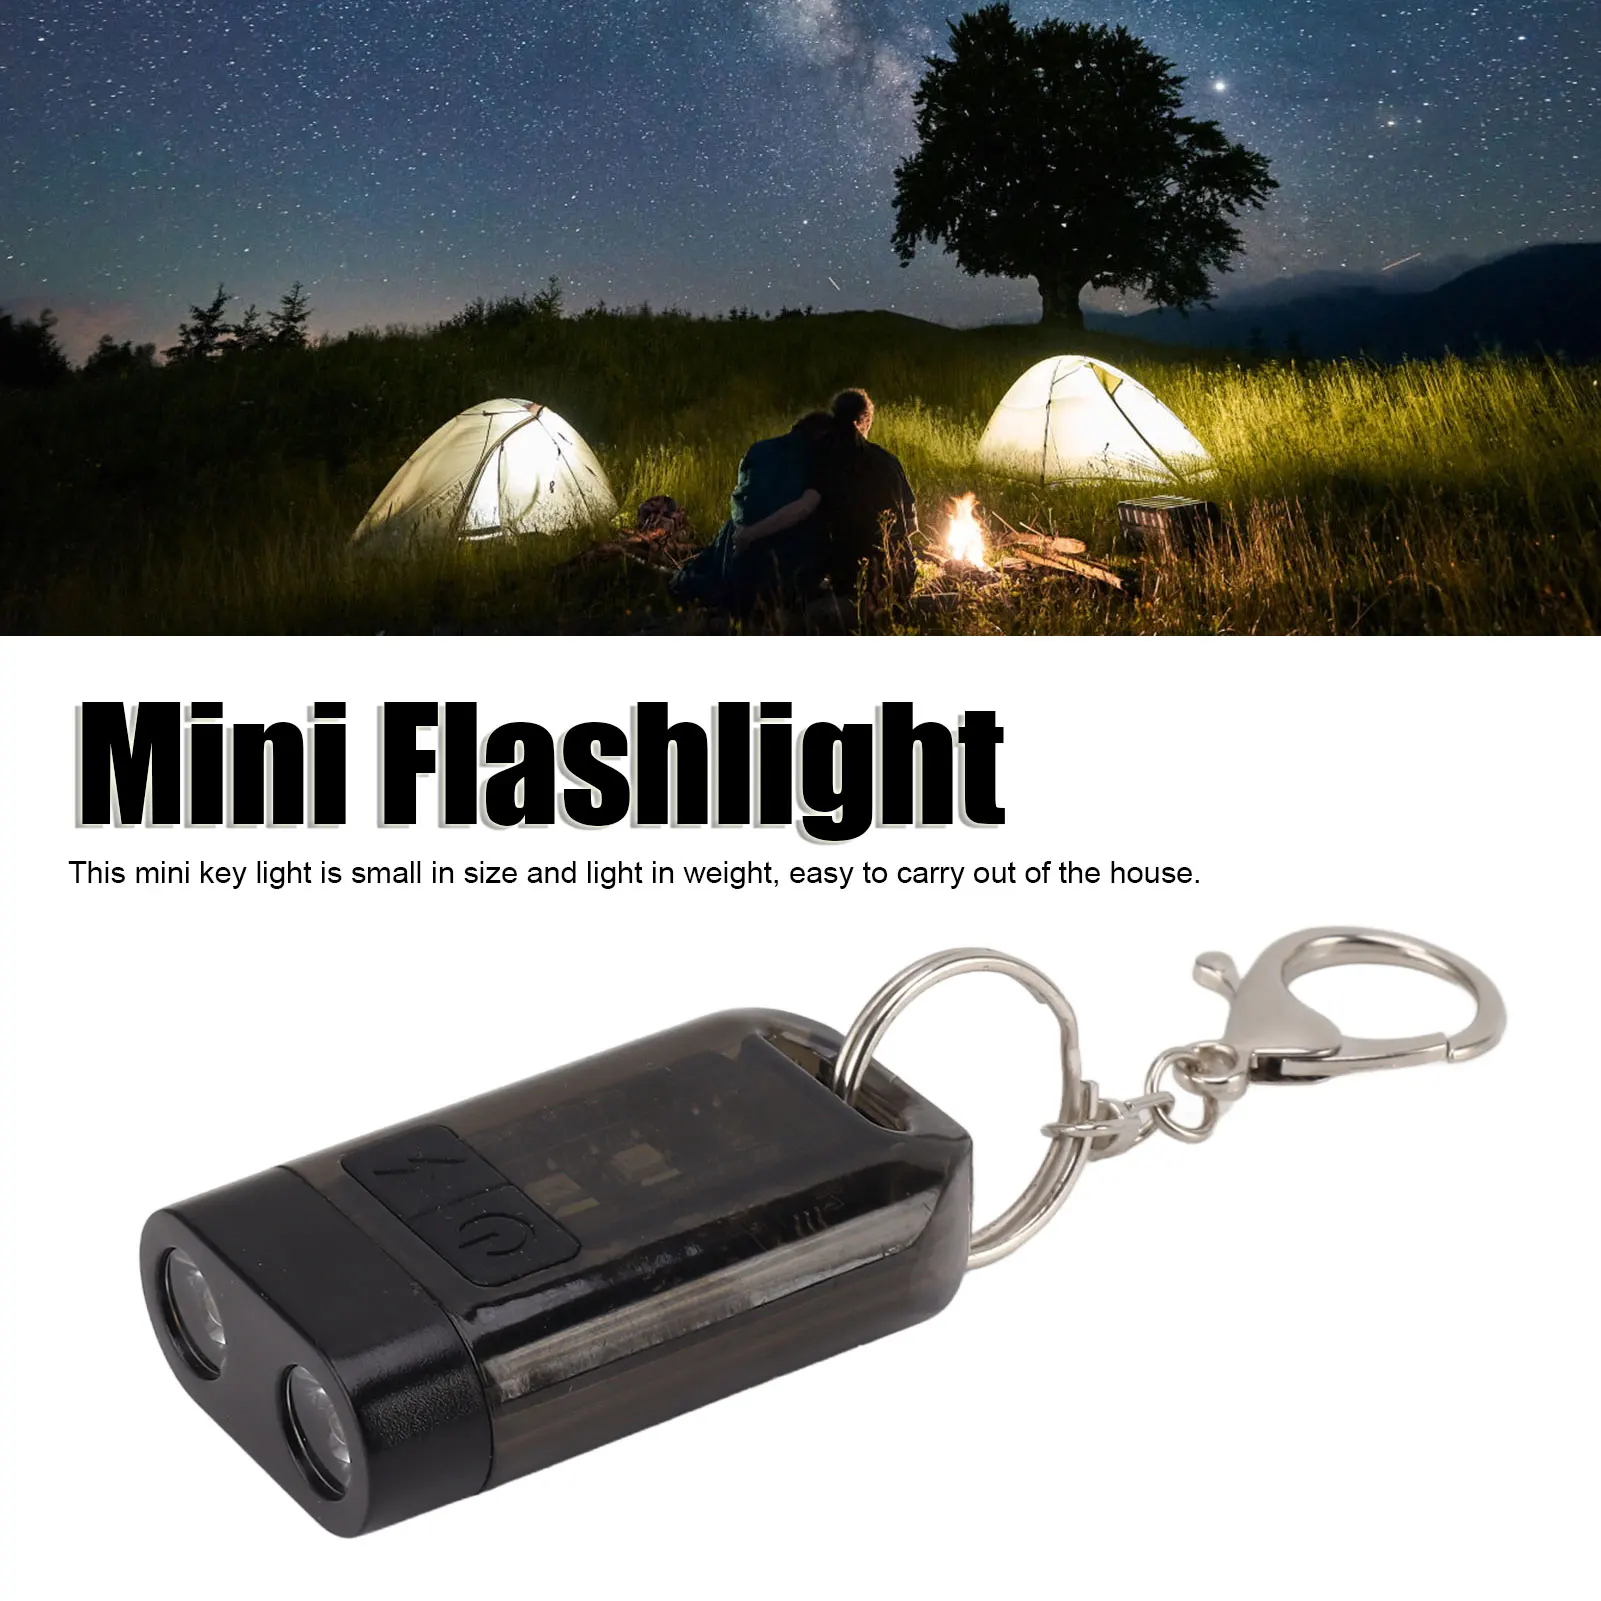 Ltra light portable rechargeable key light small keychain flashlight camping tools thumb155 crop